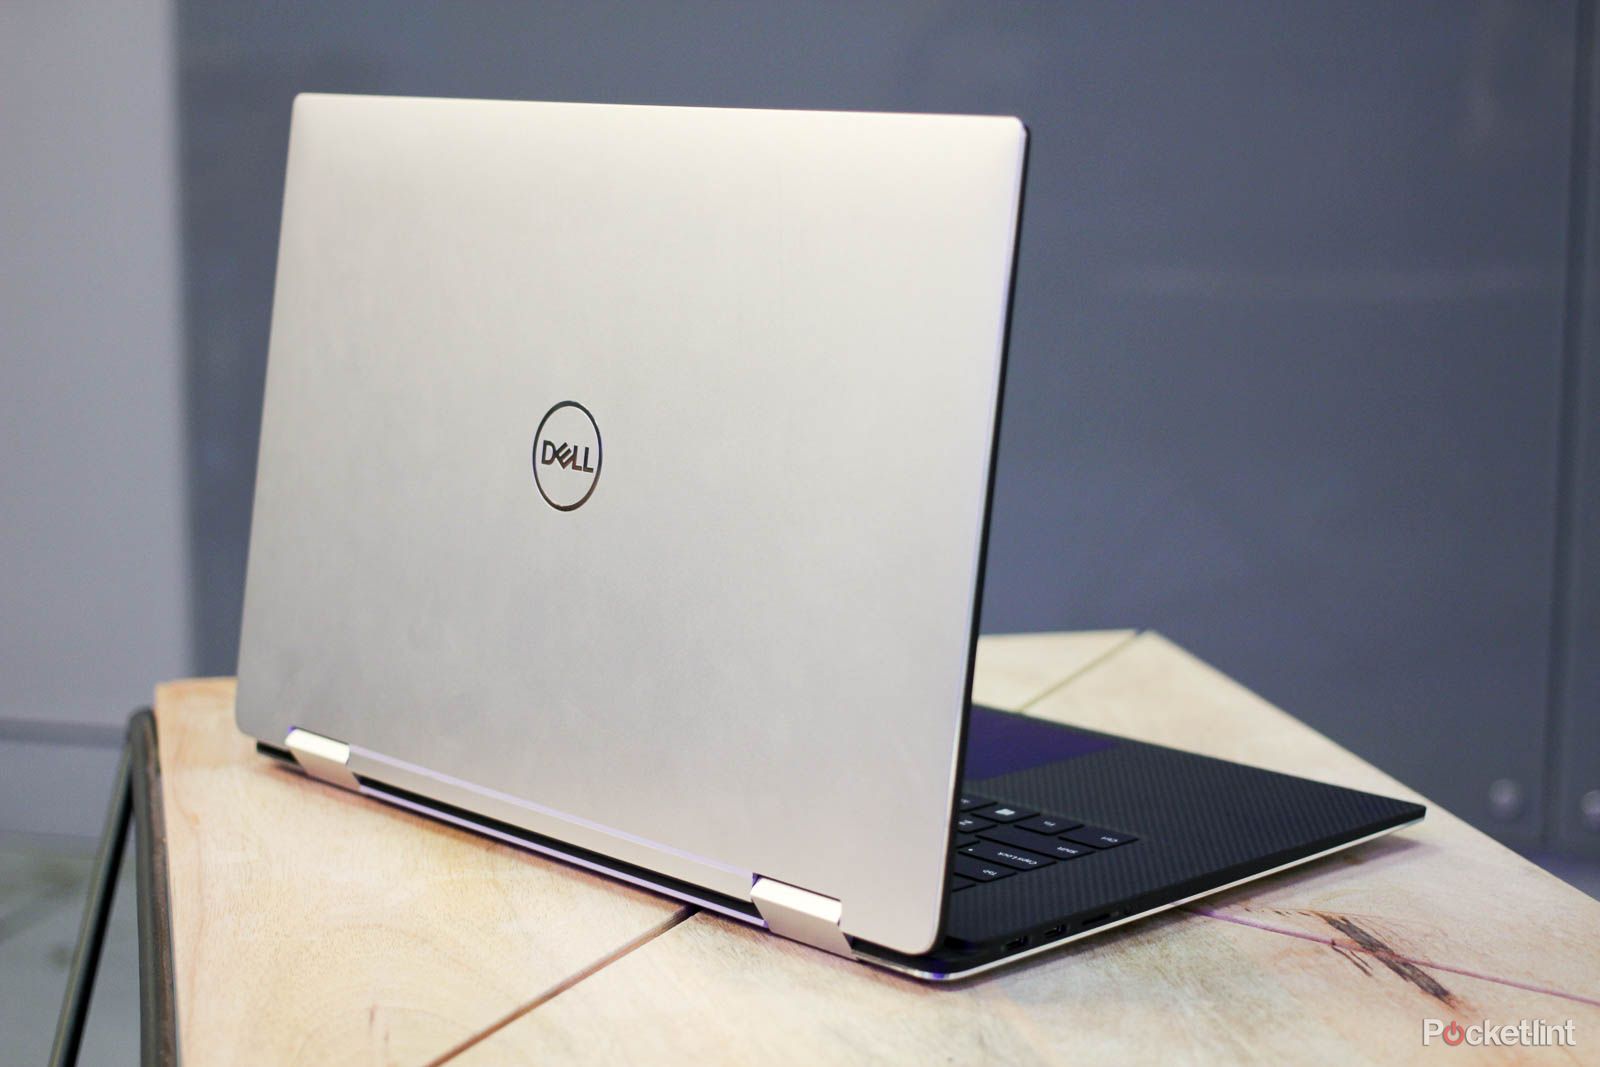 Dell XPS 15 2-in-1 image 1